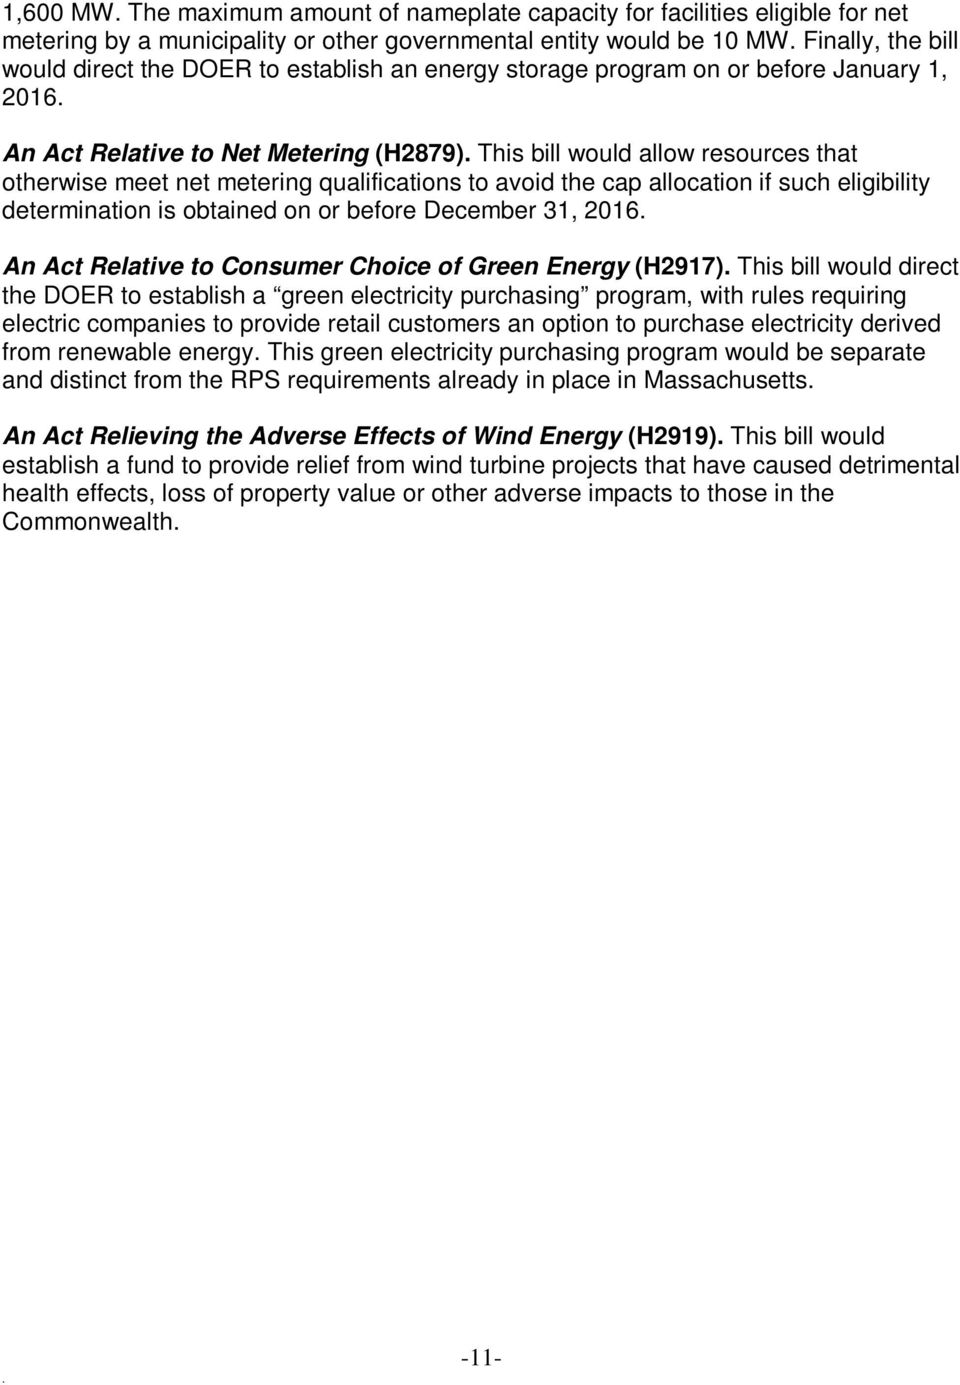 cap allocation if such eligibility determination is obtained on or before December 31, 2016 An Act Relative to Consumer Choice of Green Energy (H2917) This bill would direct the DOER to establish a